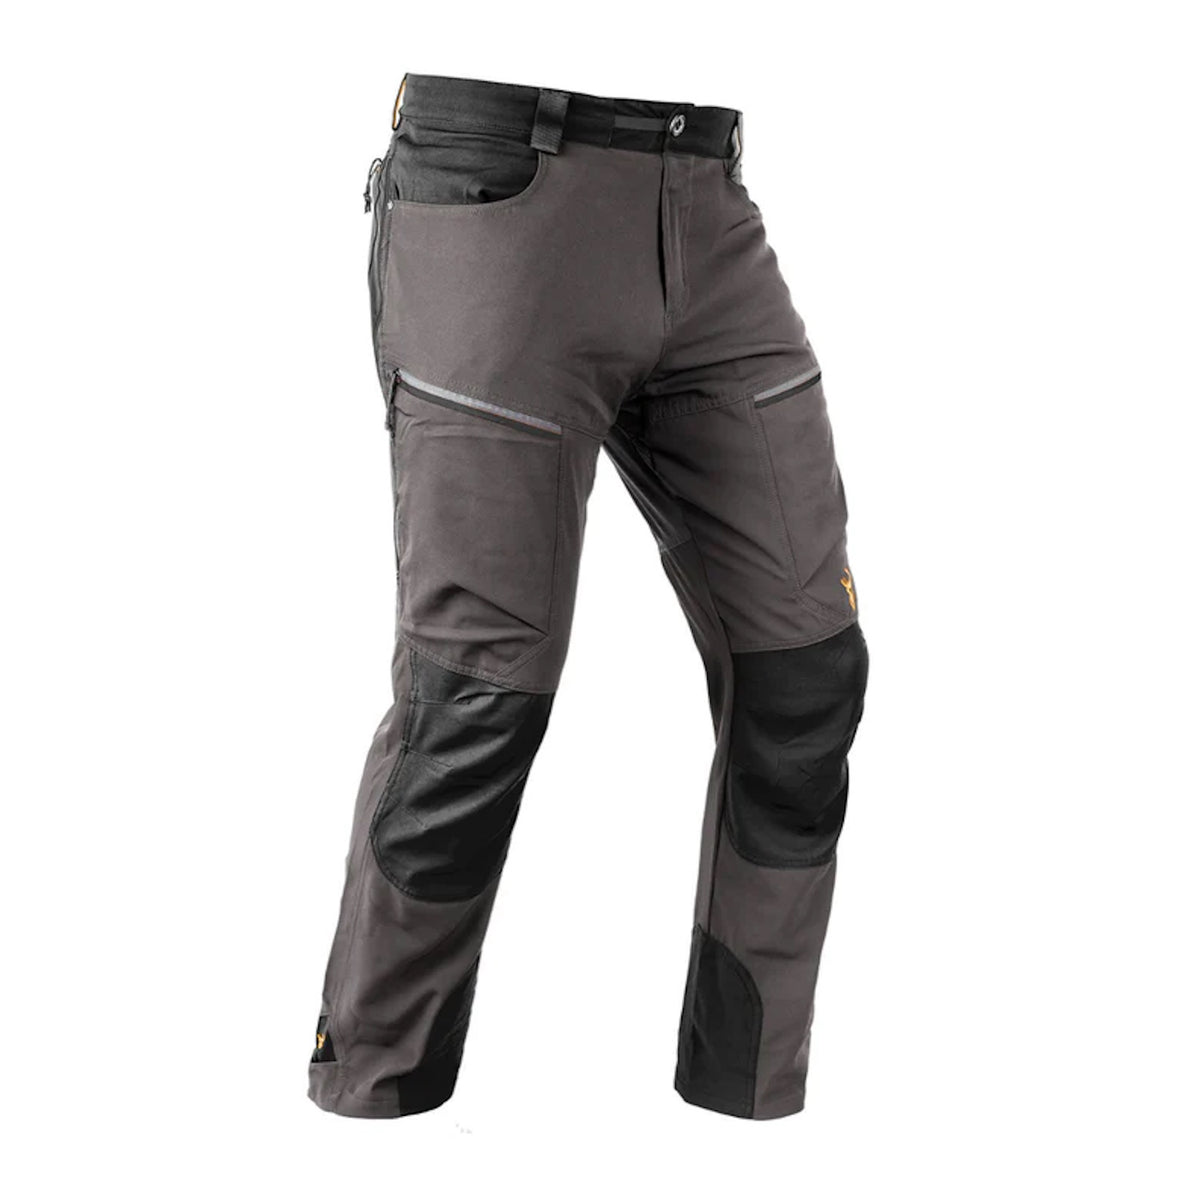 Hunters Element Legacy Trousers in Black/Grey